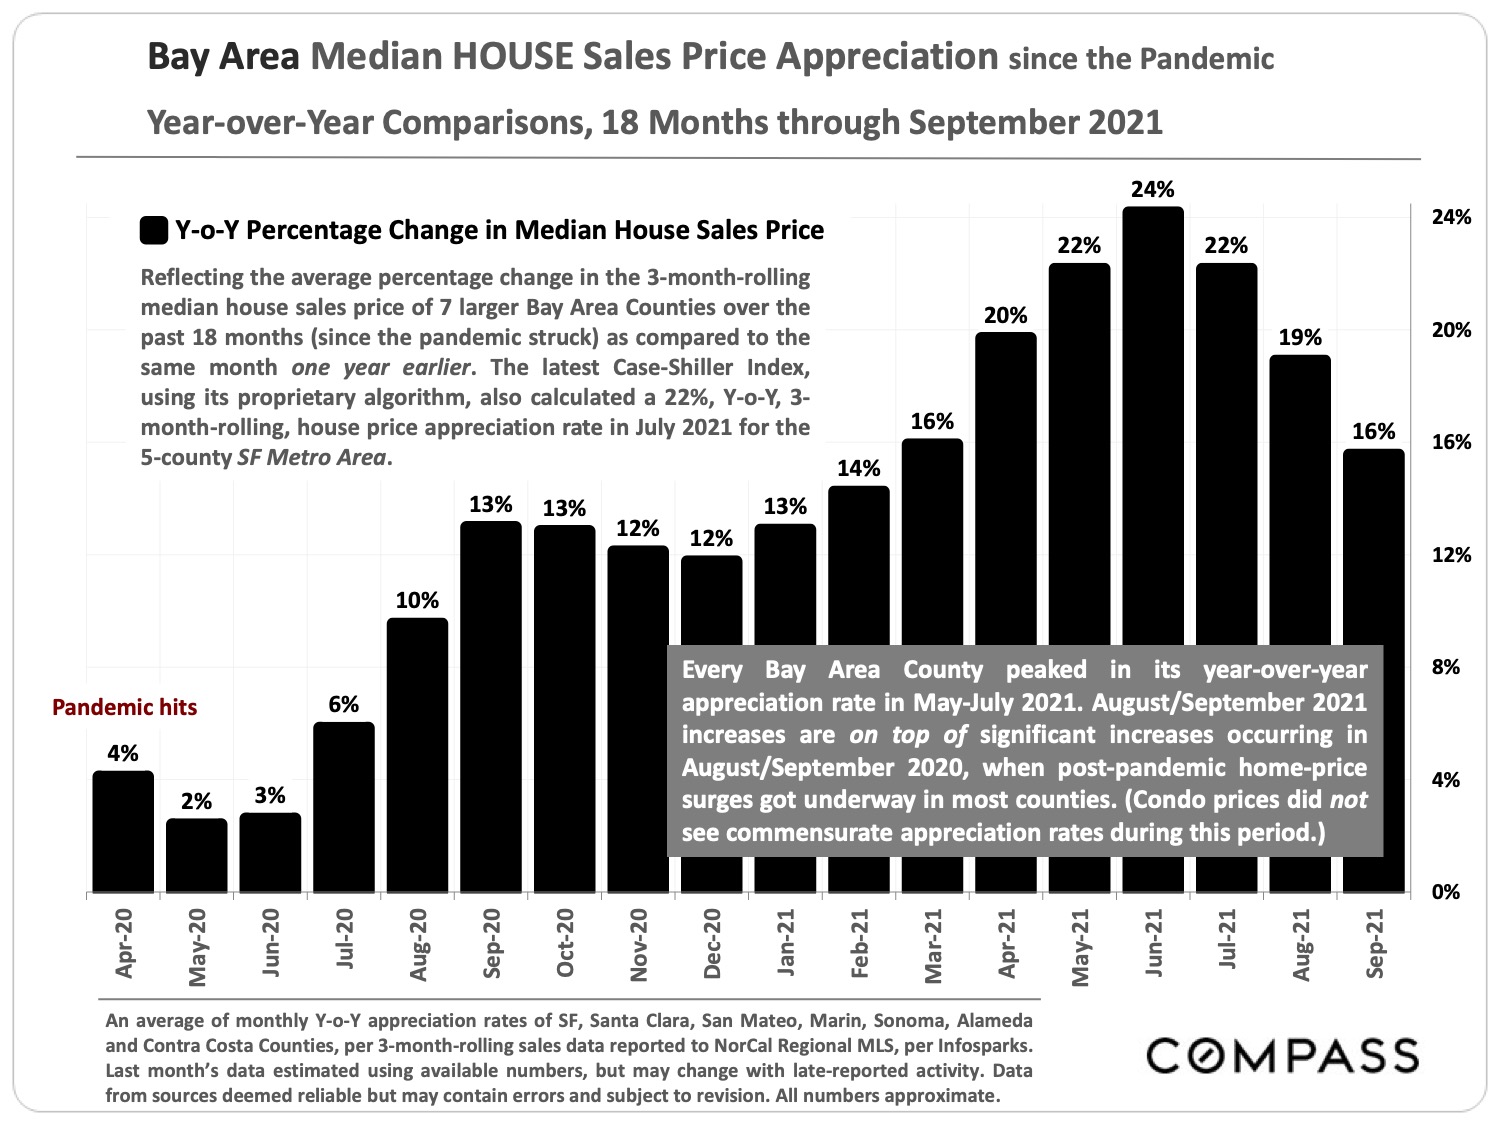 Bay Area Median House Sales Price Appreciation Since The Pandemic - Year-over-Year Comparison 18 Months Through September 2021